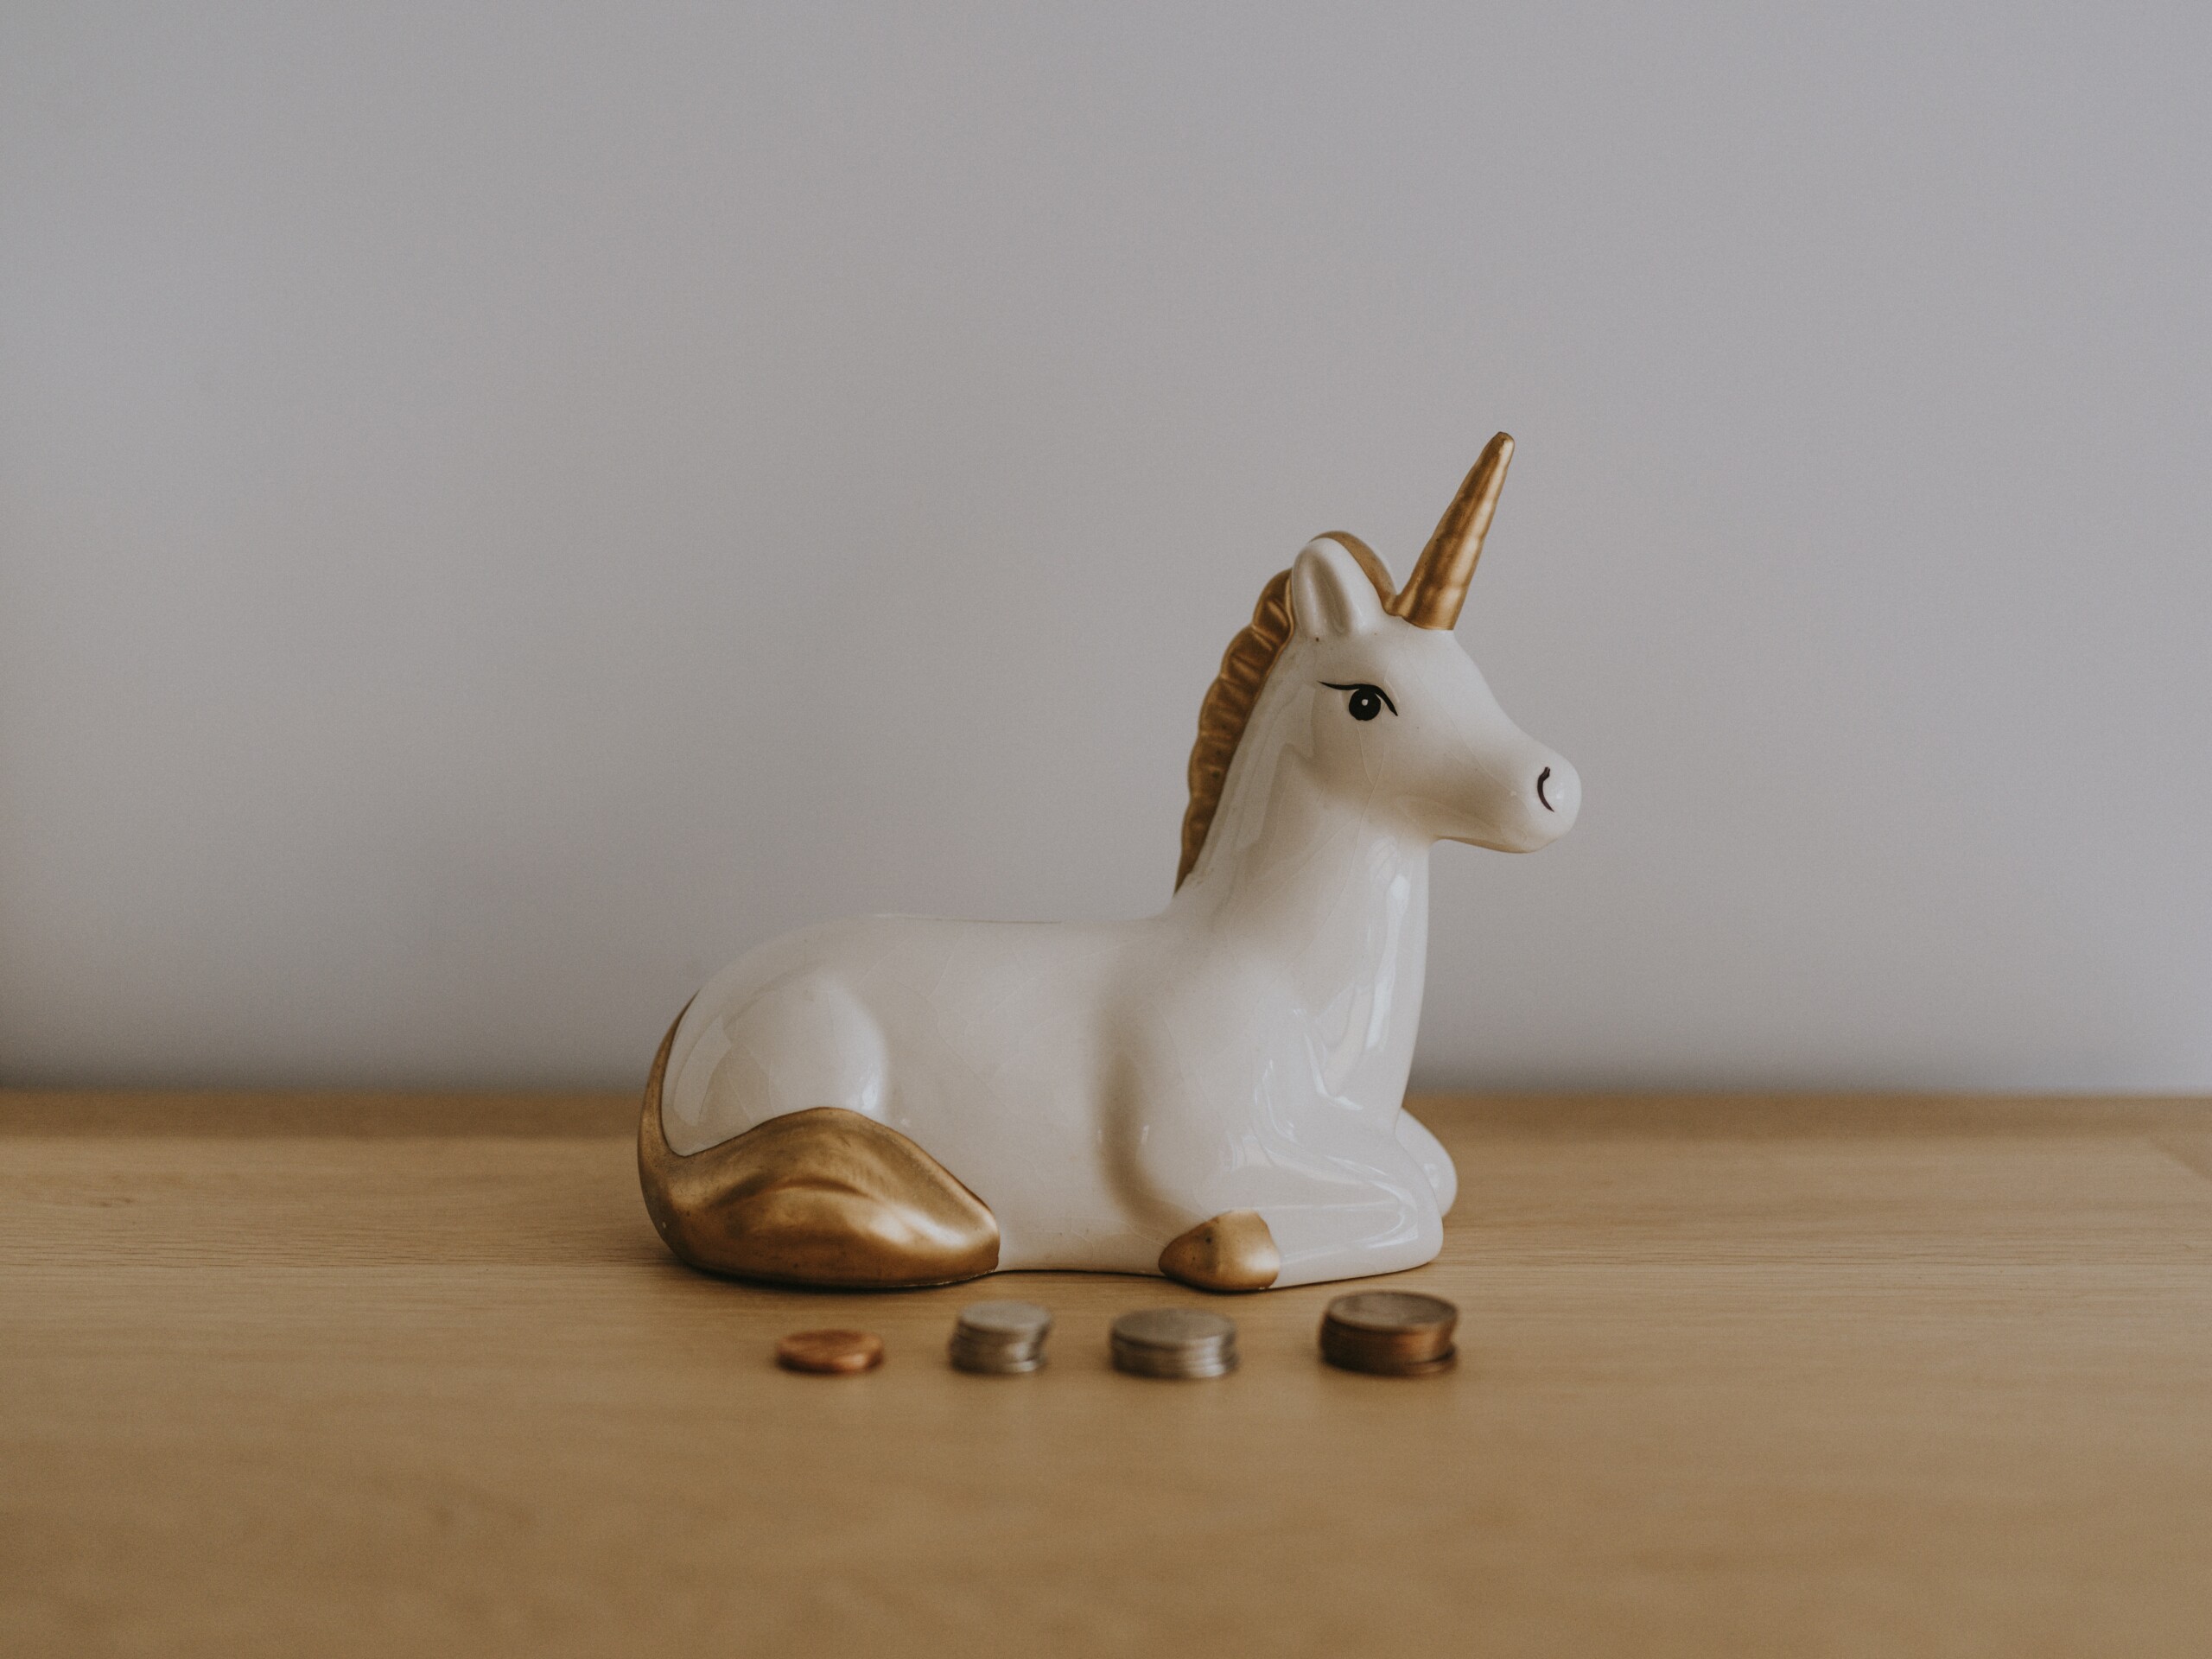 Research Paper: The Dangerous Myth of the Unicorn Leader